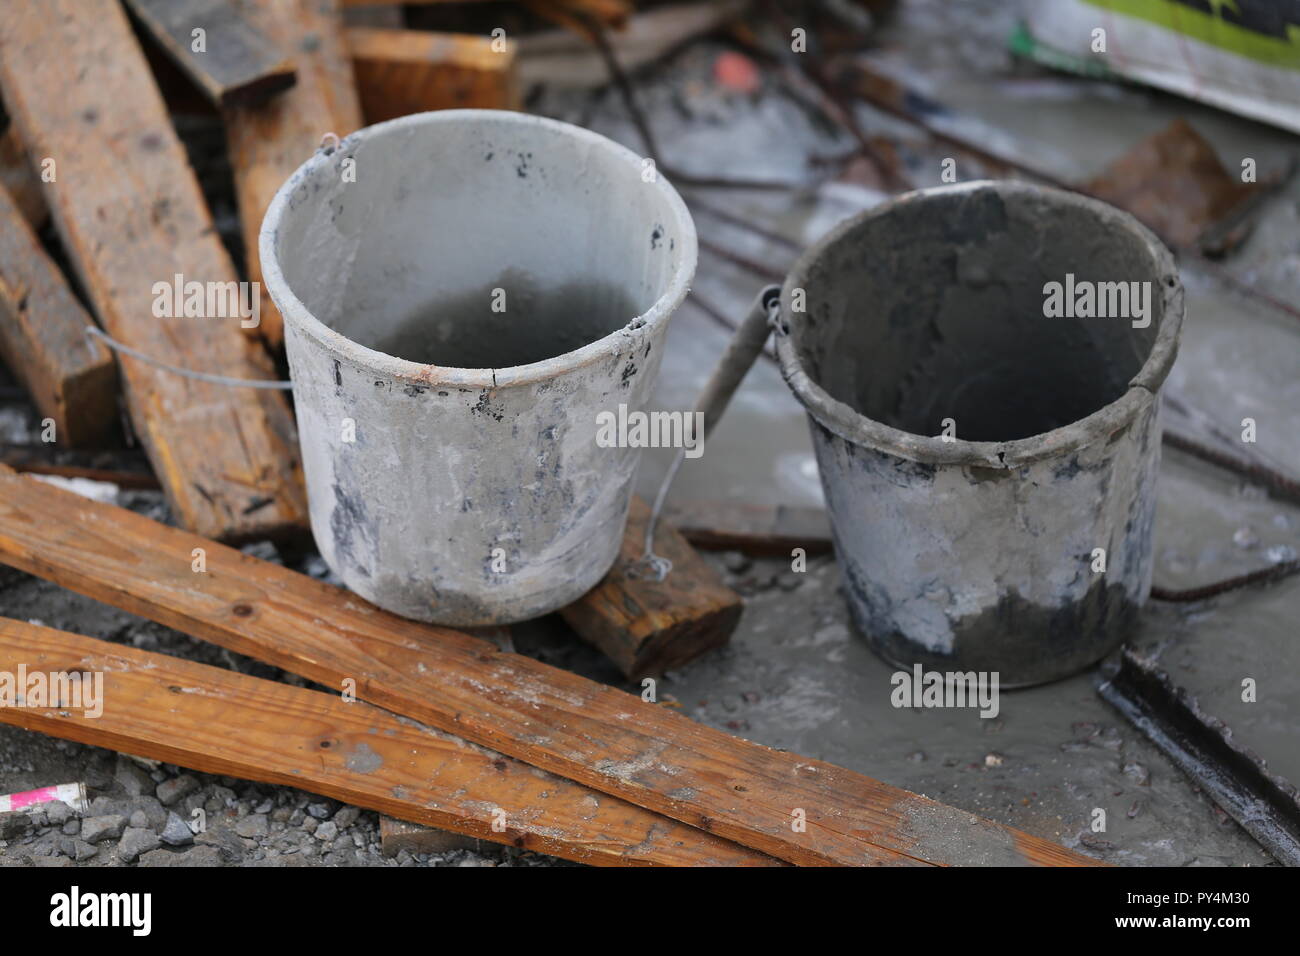 Two Buckets In Construction Site.  Two empty buckets near dirty used planks. White bucket and gray bucket in a messy construction site. Stock Photo